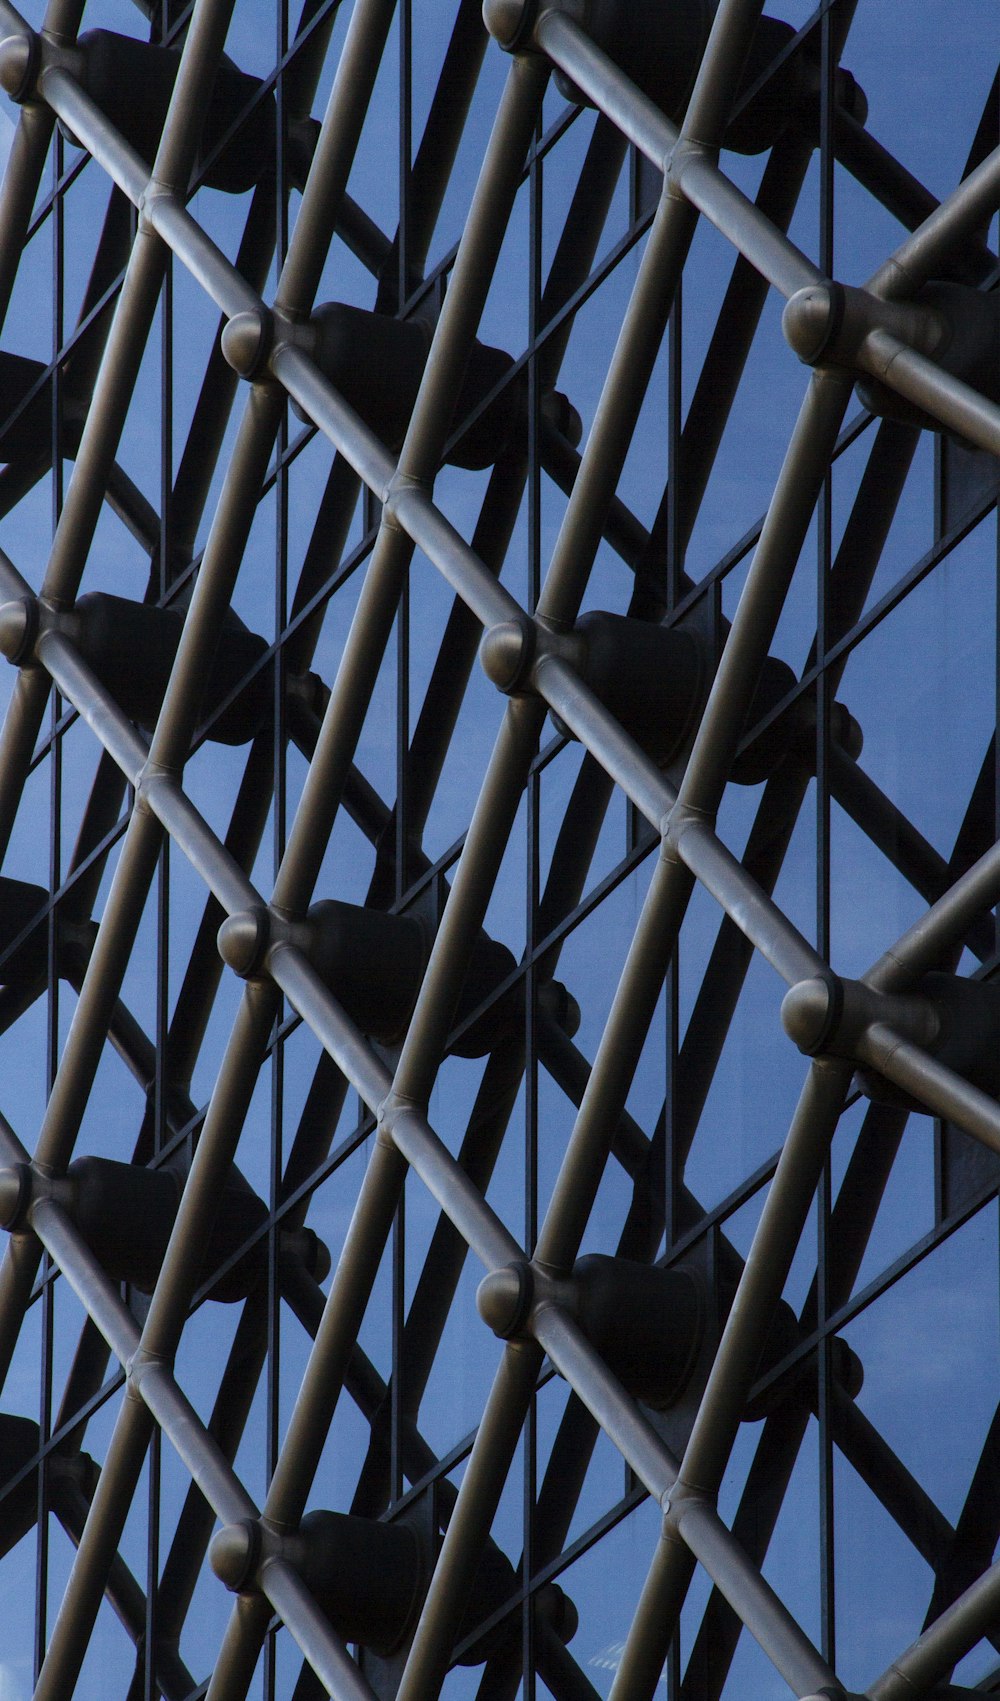 a close up of a metal structure with birds on it